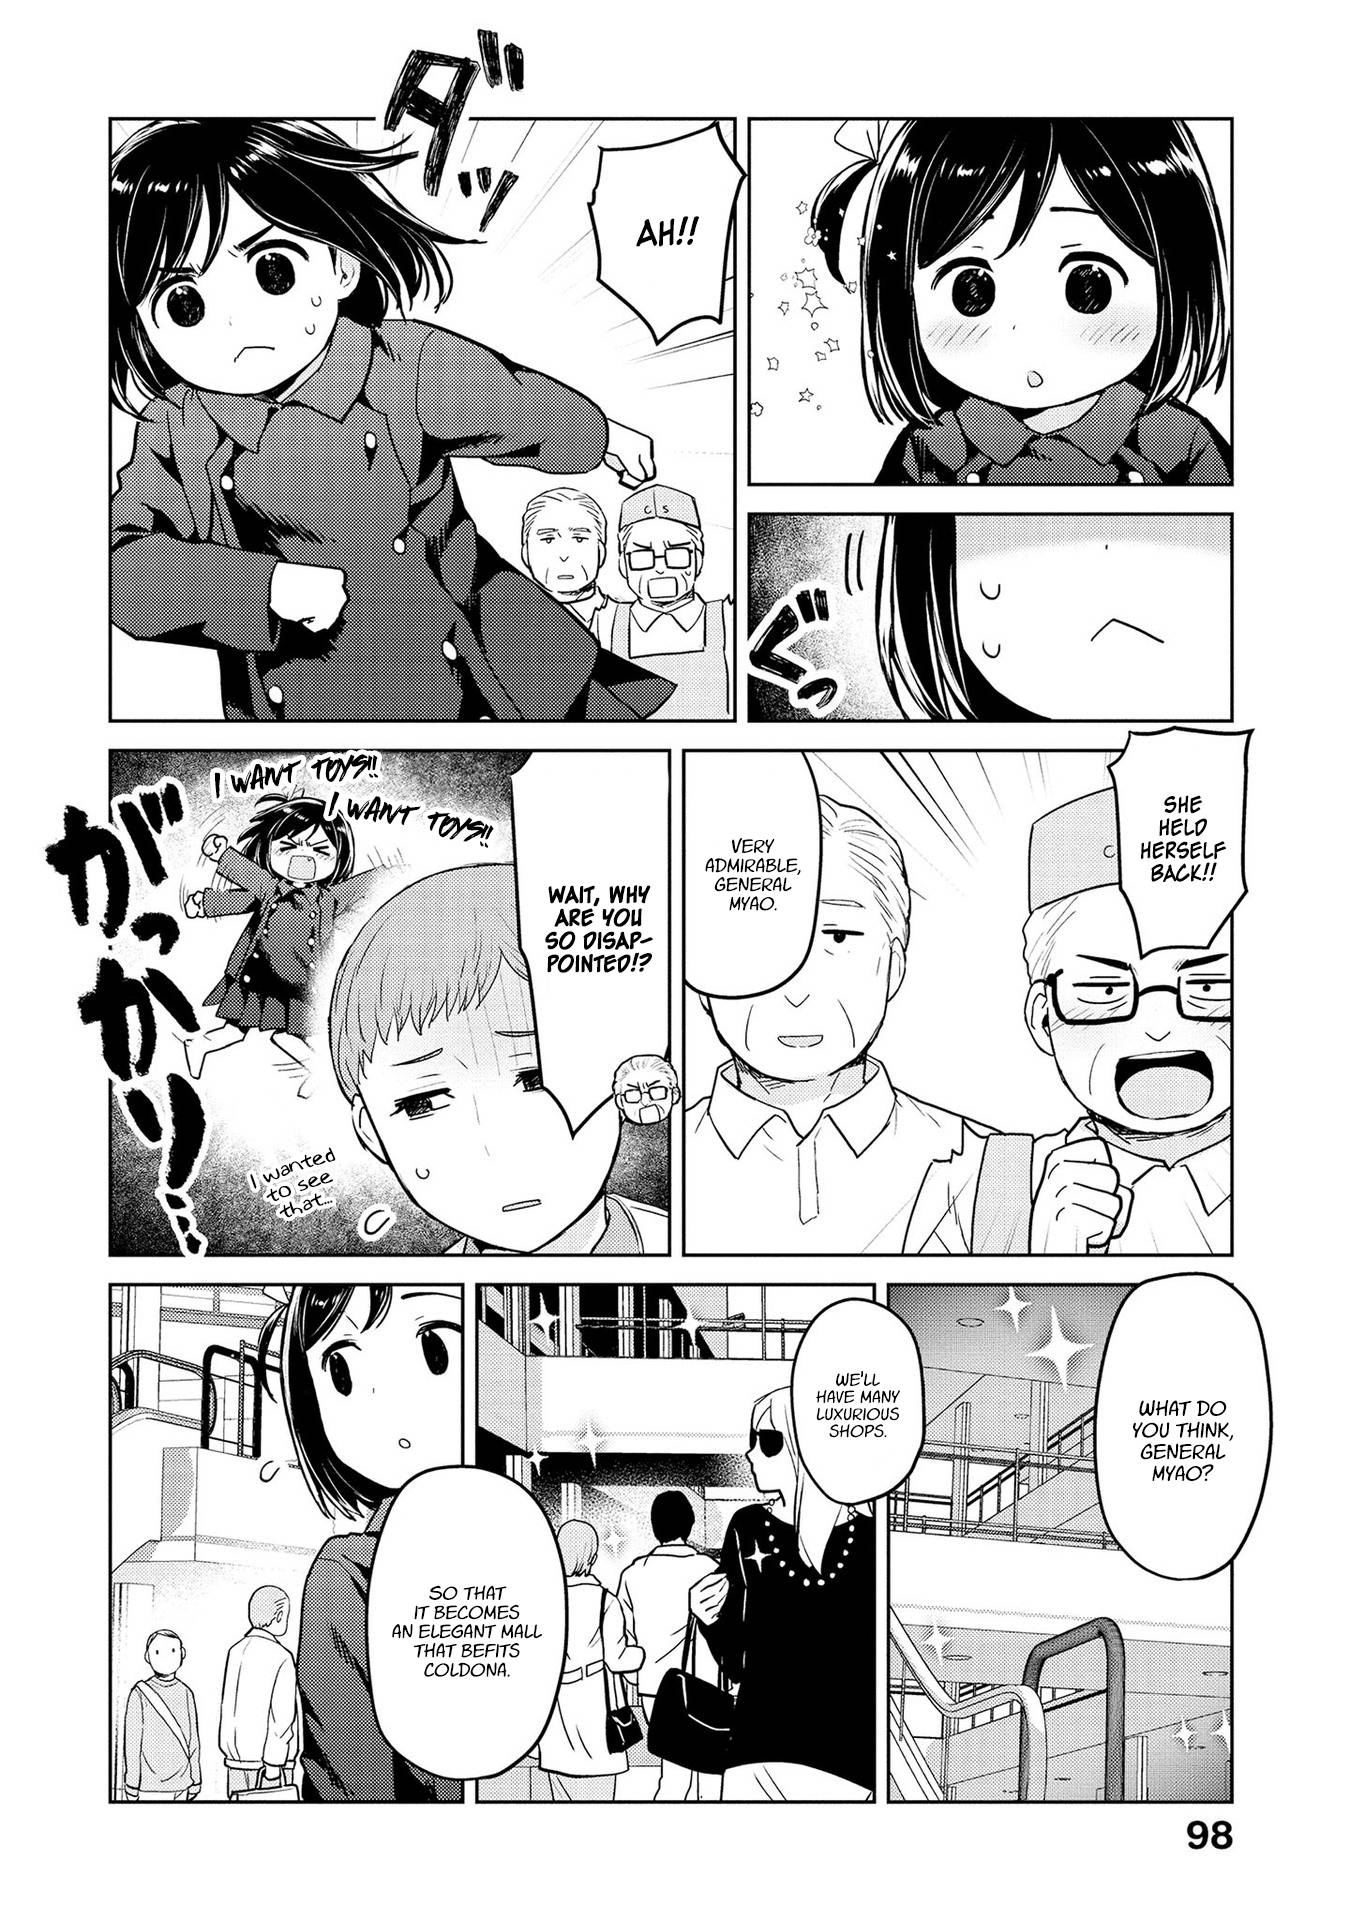 Oh, Our General Myao. - chapter 34 - #6